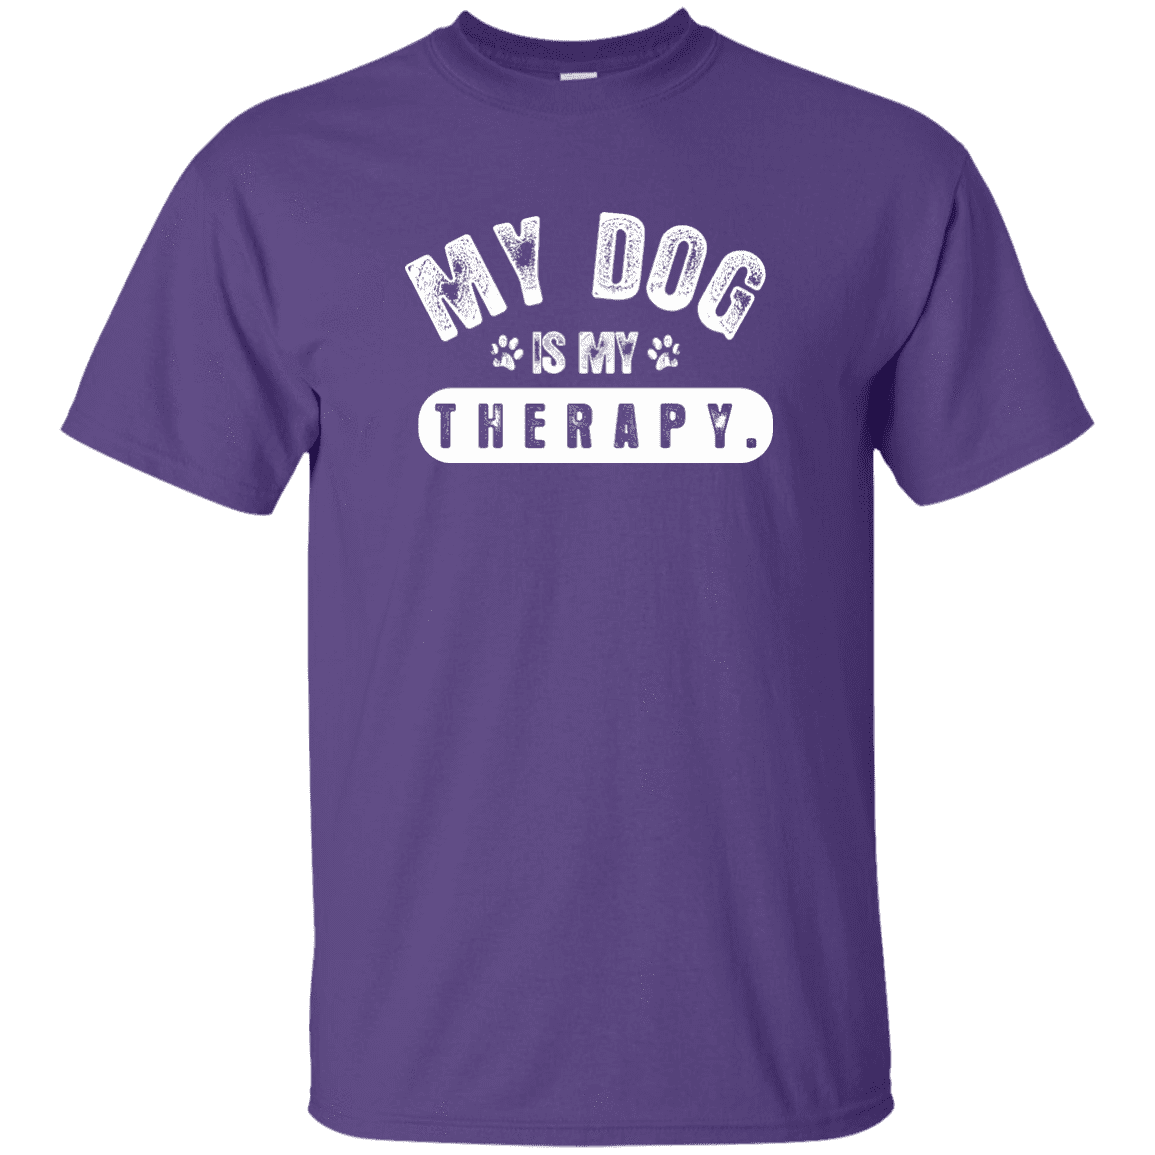 My Dog Is My Therapy - T Shirt.